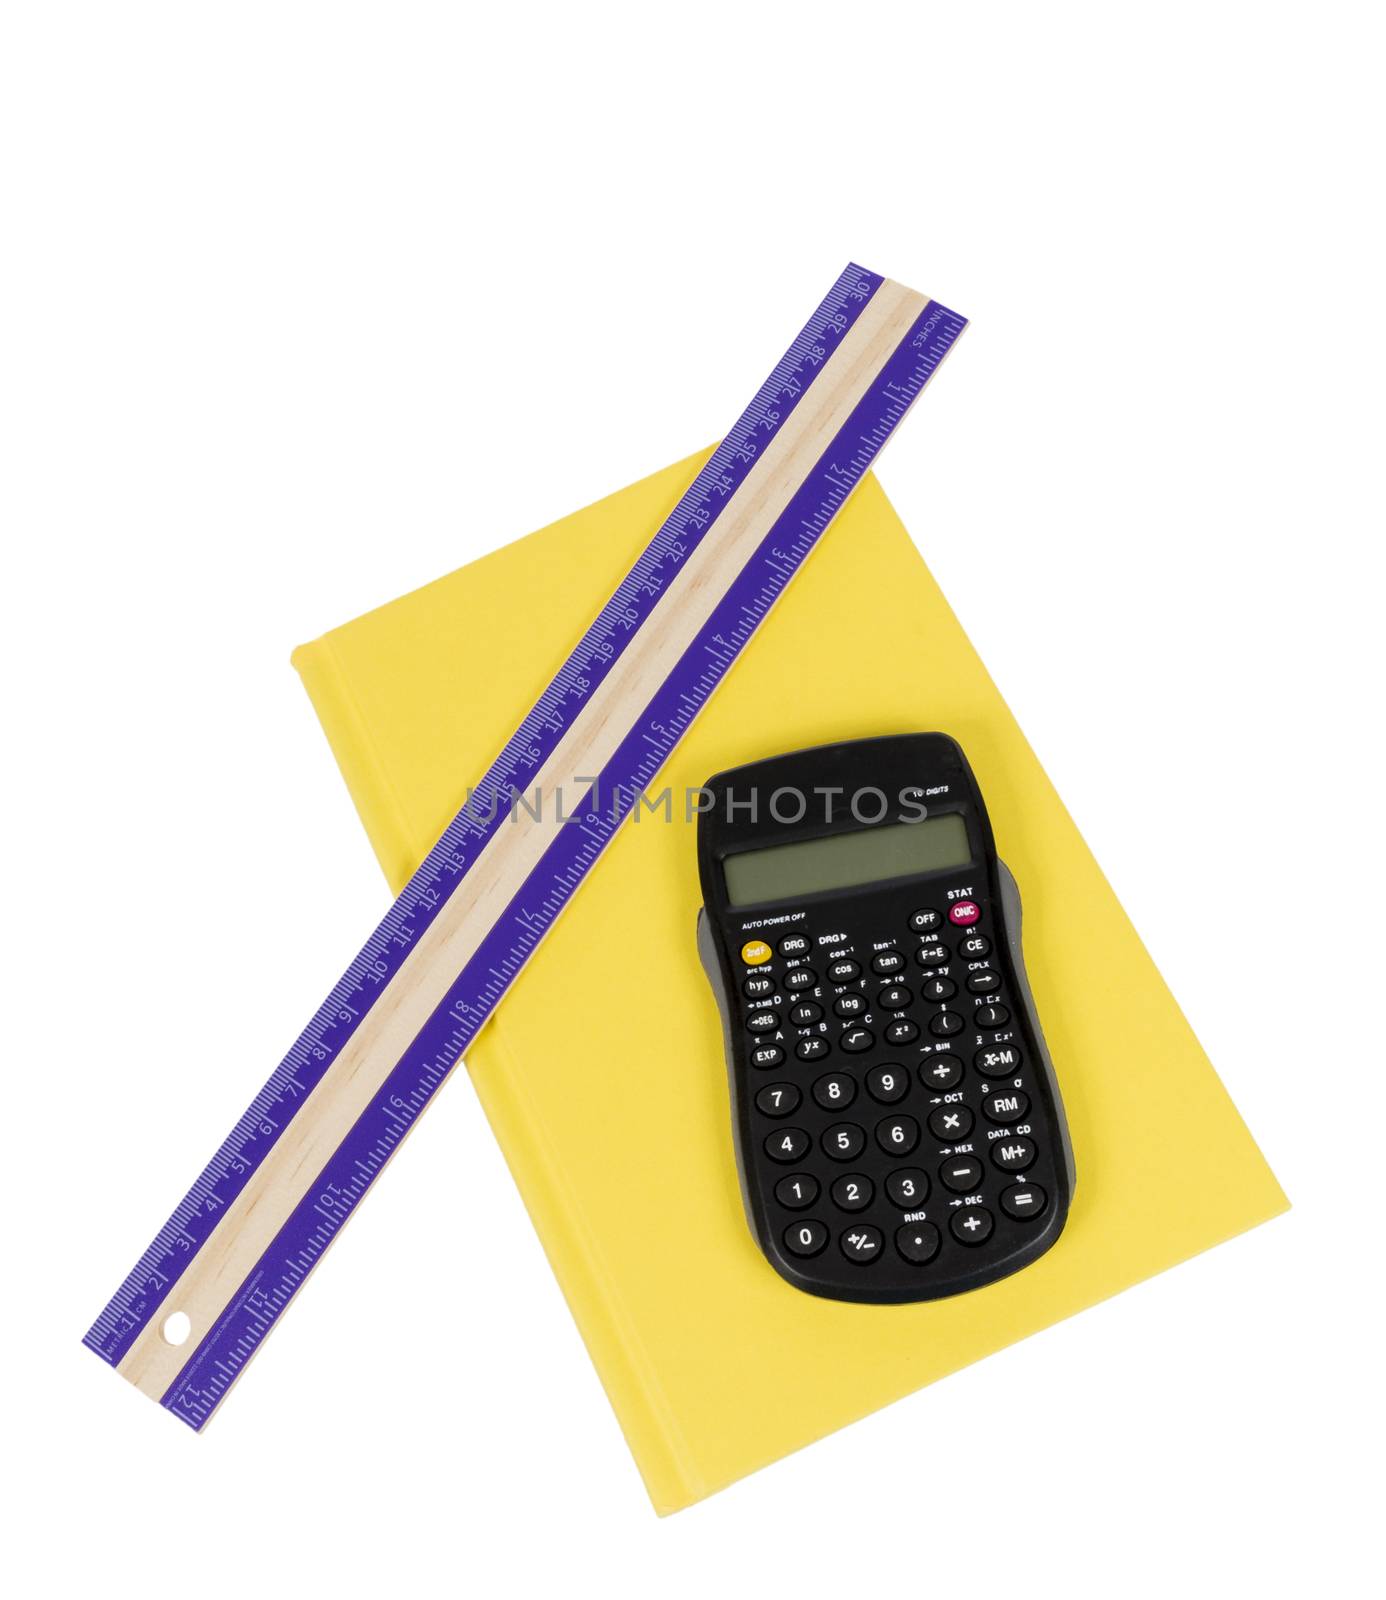 Nice shot of a purple ruler and calculator resting on a bright yellow colored book isolated on white background.